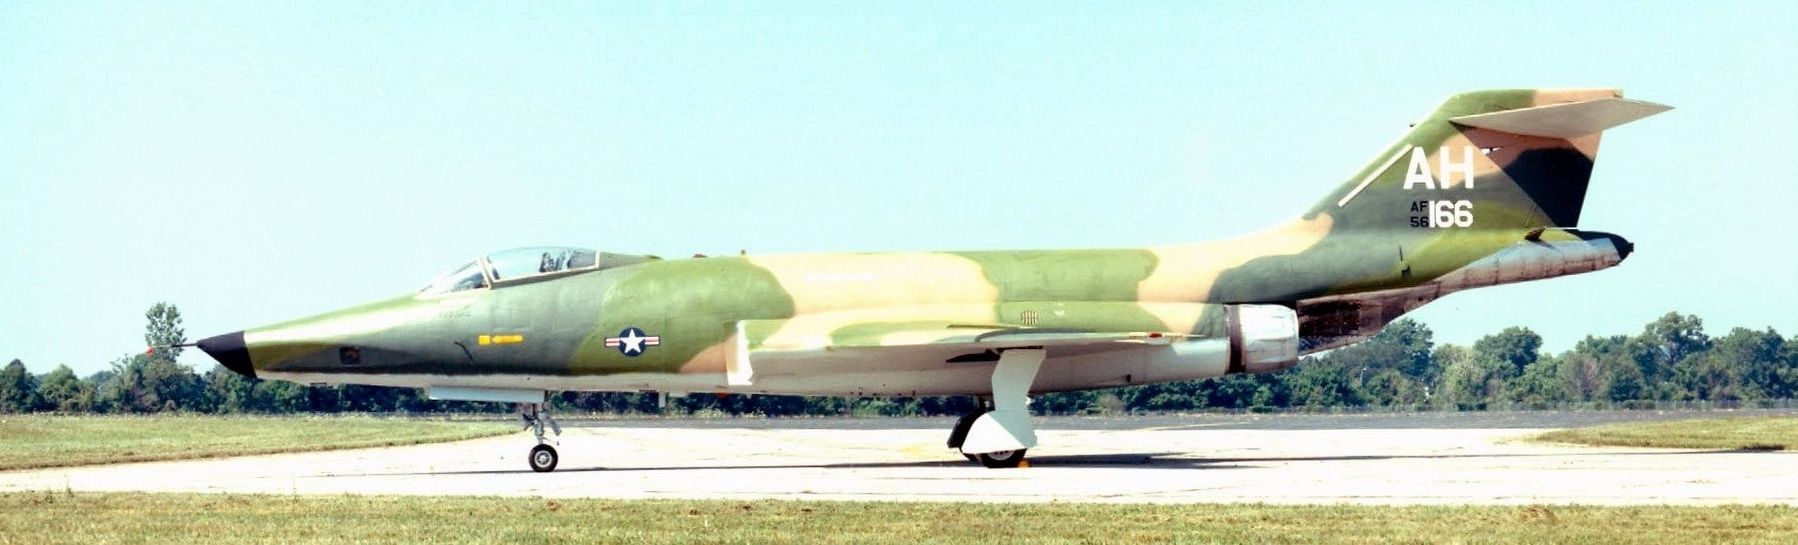 McDonnell RF-101C "Voodoo" image. Click for full size.